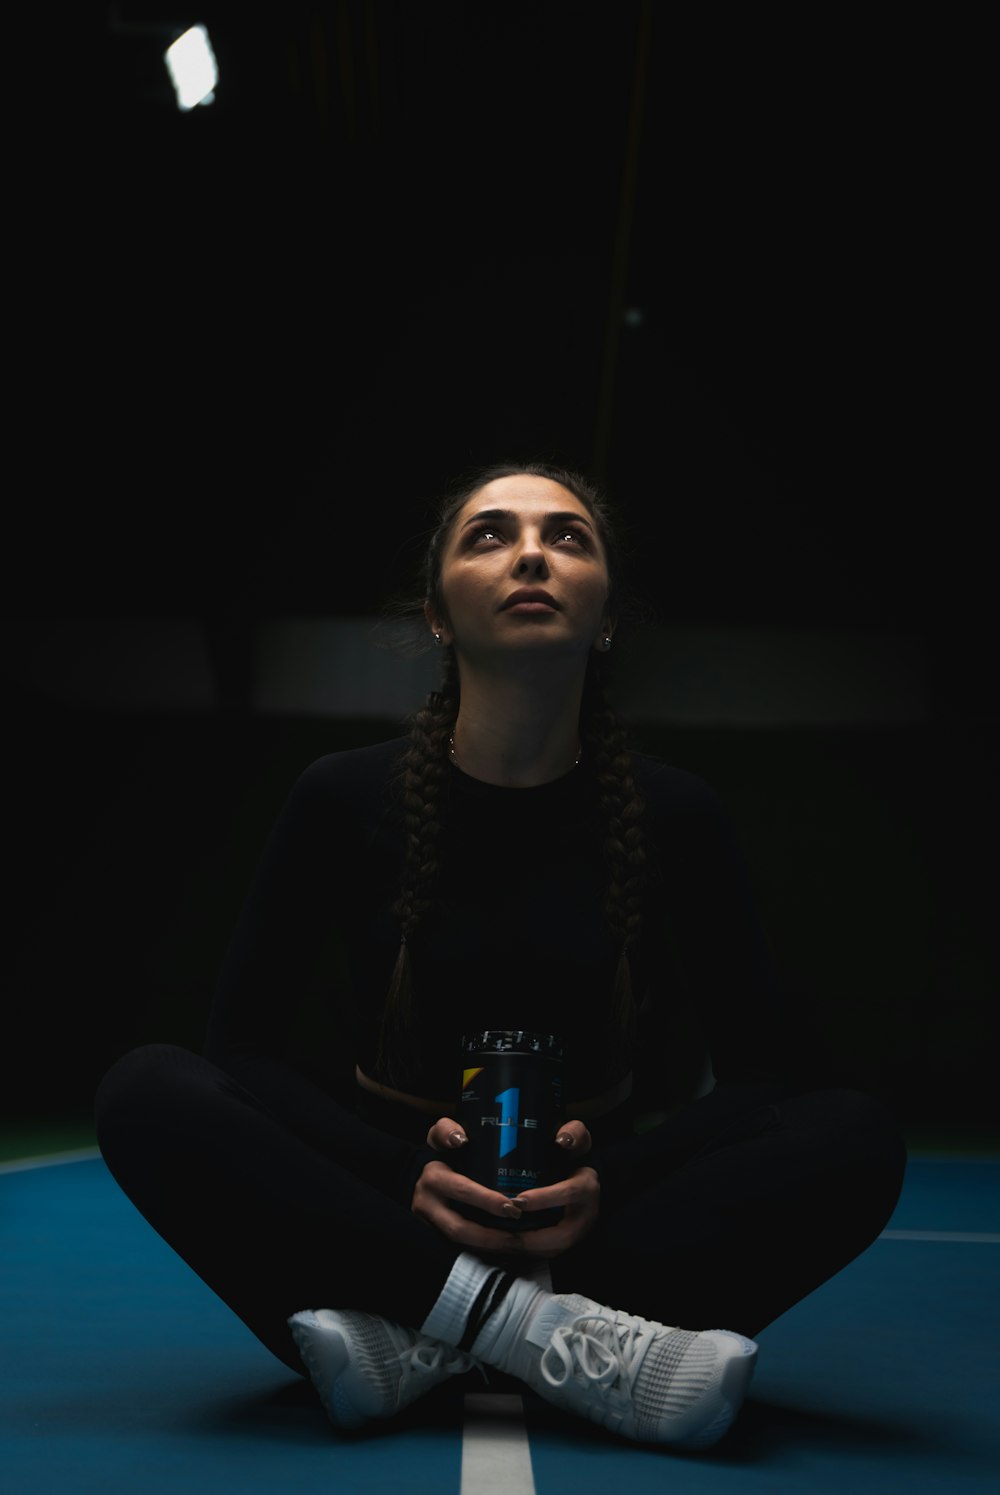 a woman sitting on a tennis court holding a can